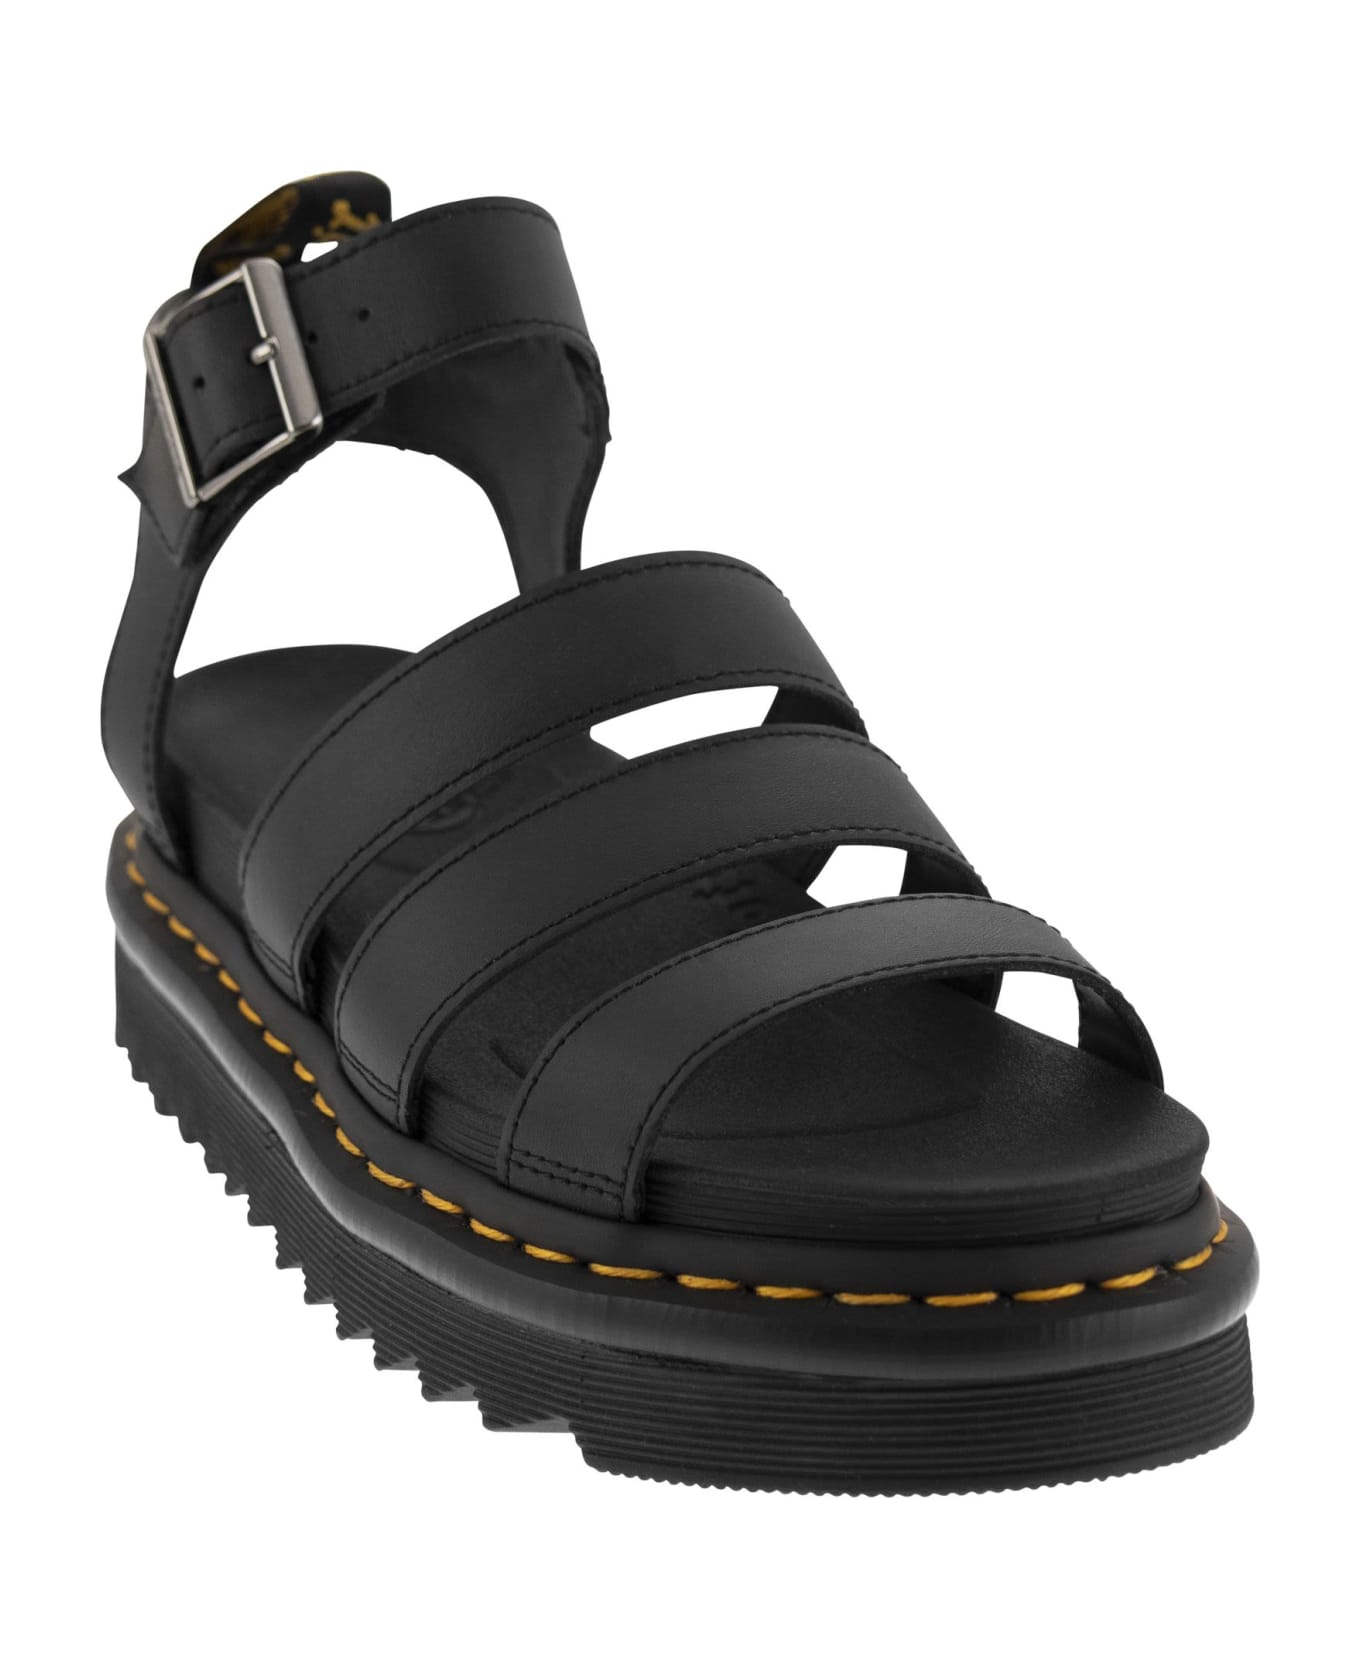 Dr. Martens Blaire Leather Sandals With Straps - Black サンダル